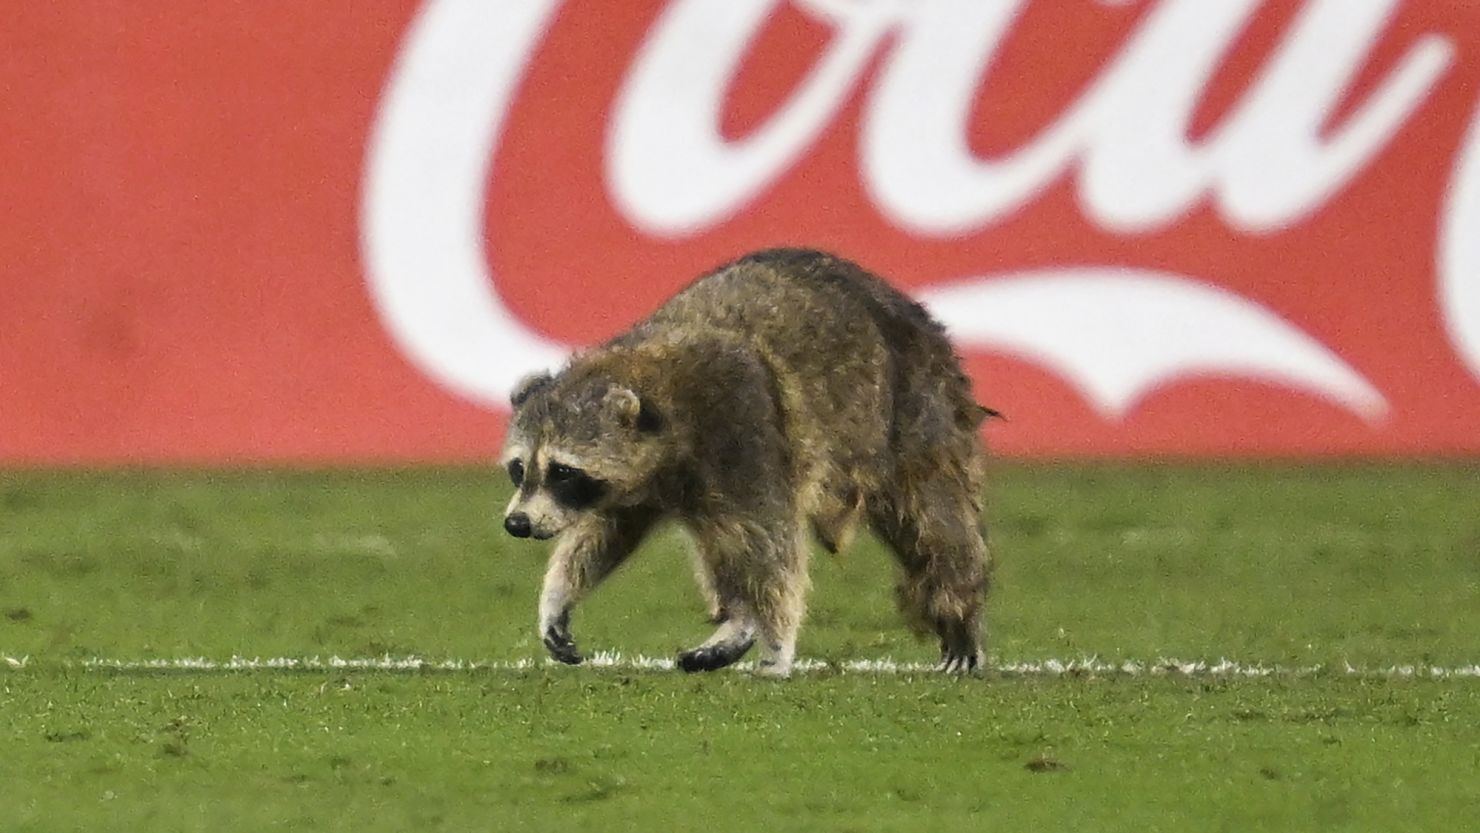 The furry pitch invader paused play between NYCFC and the Philadelphia Union.